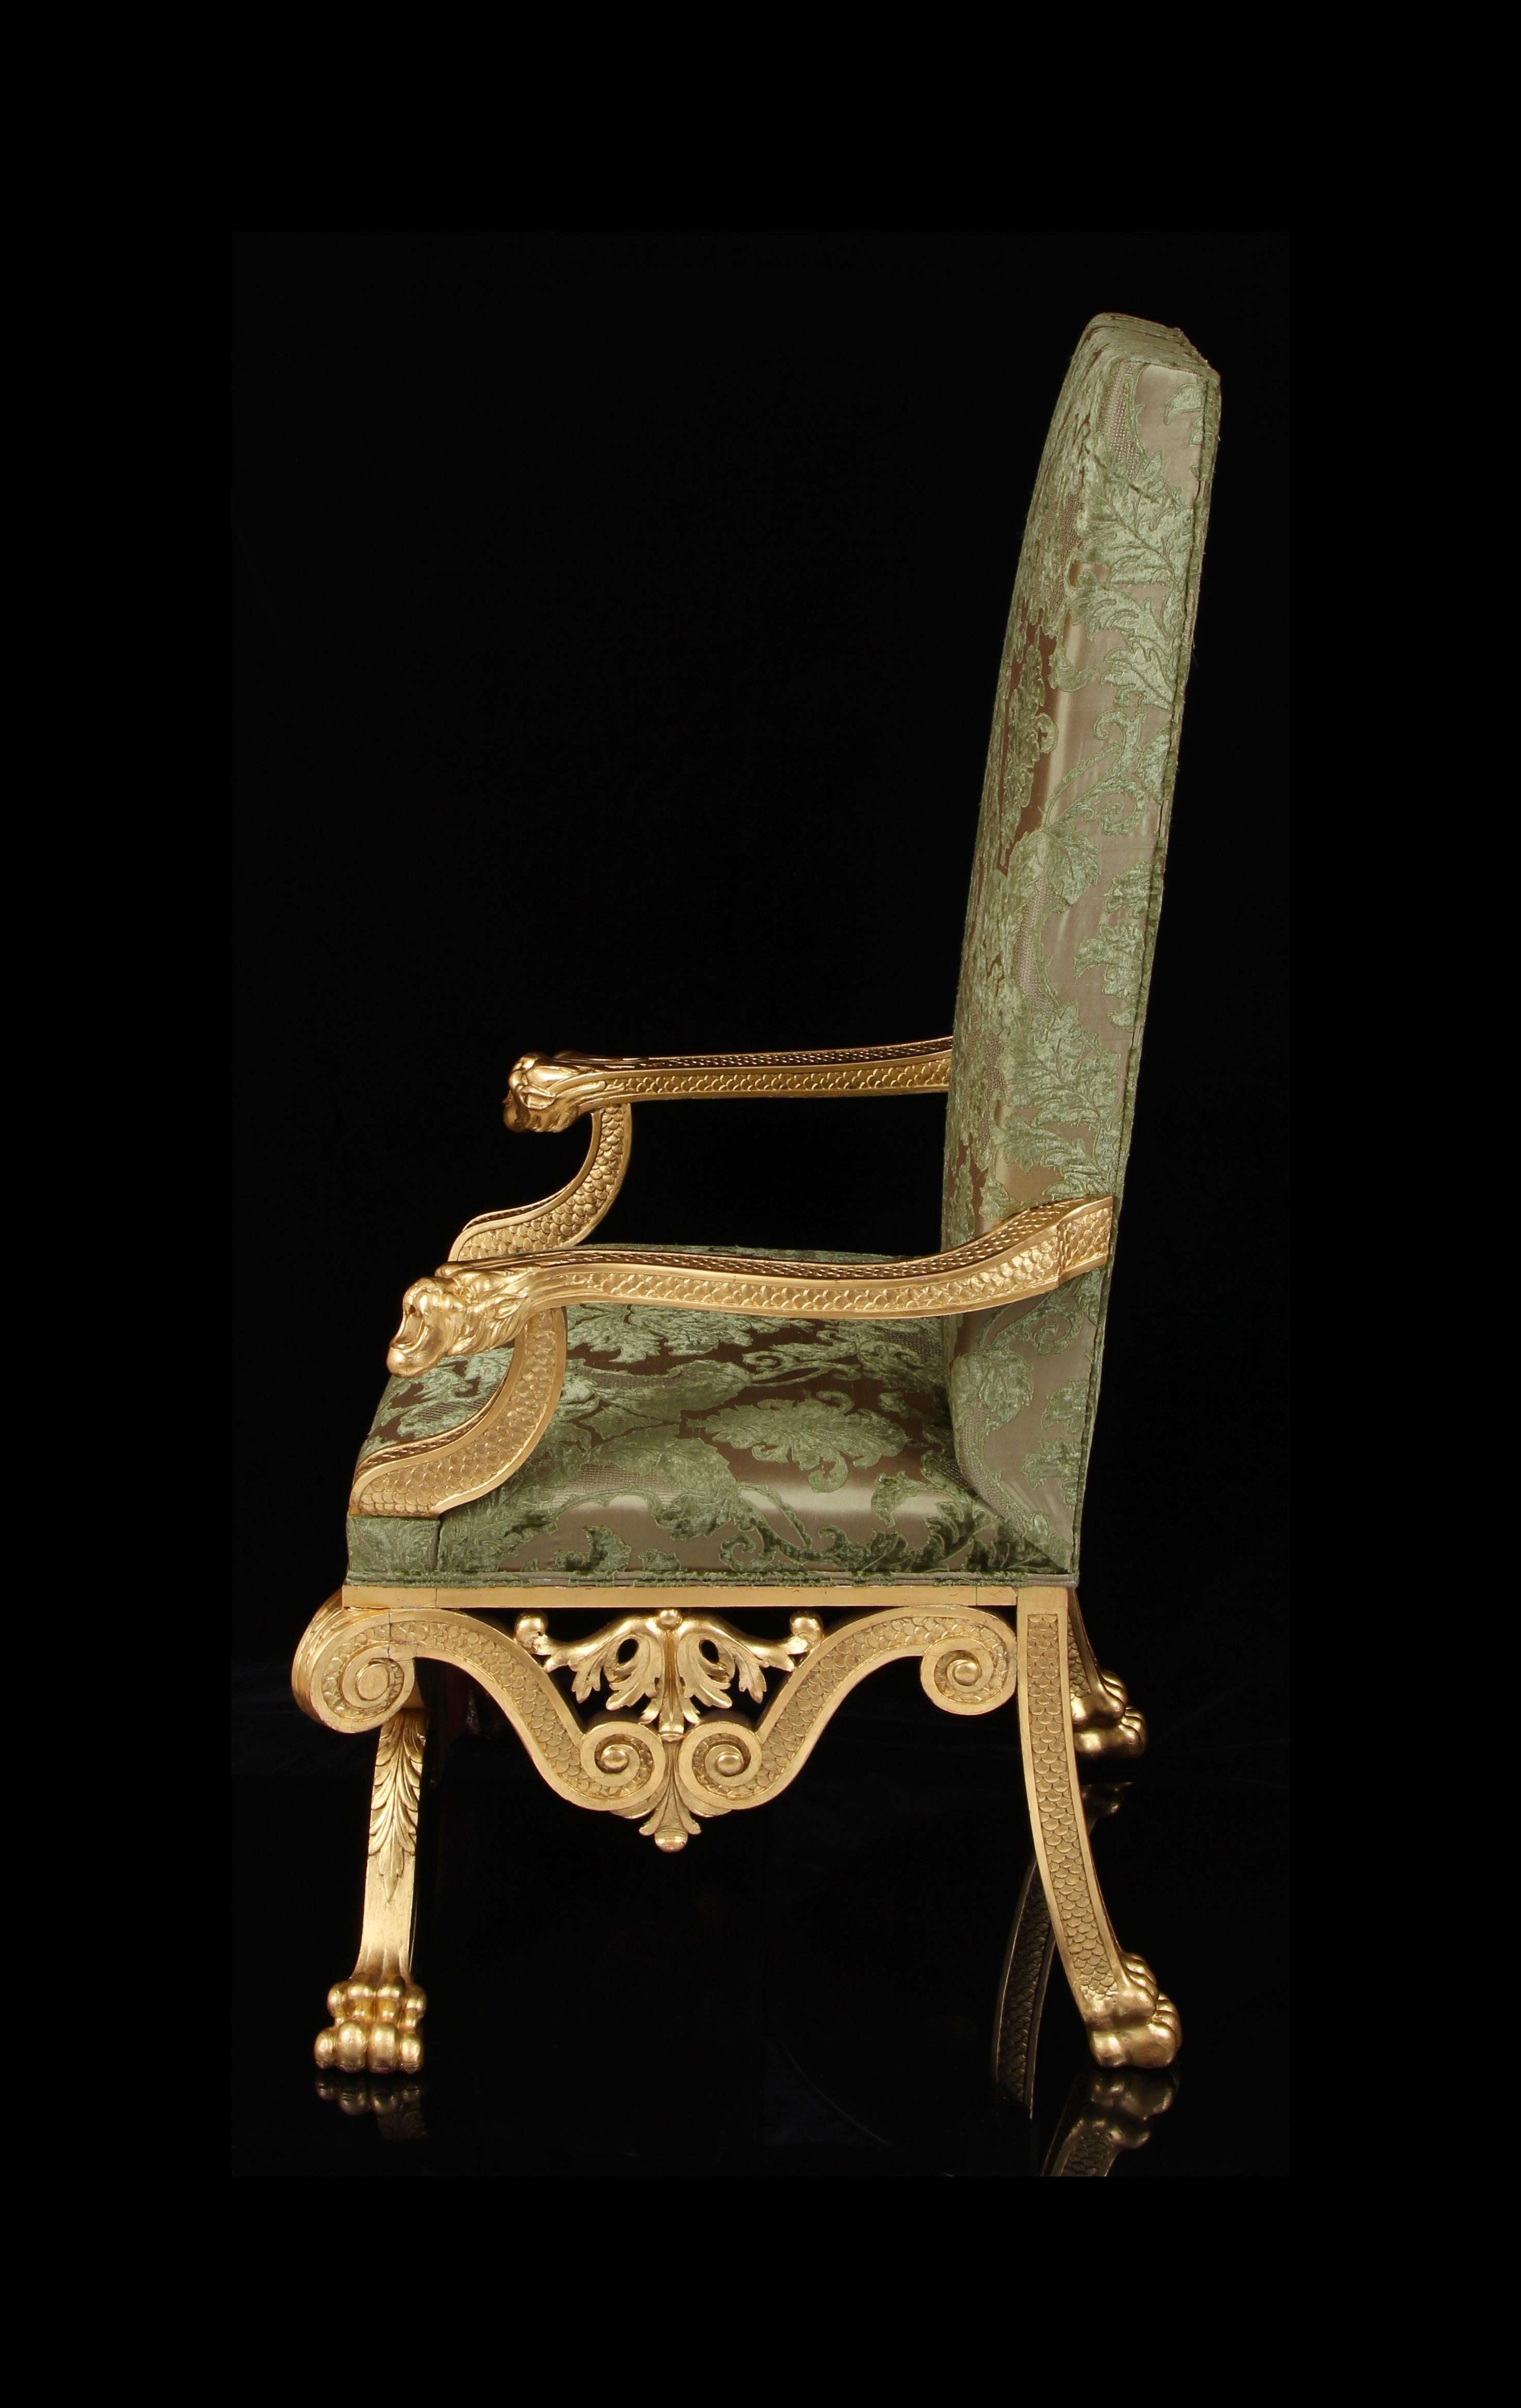 19th Century Giltwood Throne Armchair, design attributed to William Kent In Good Condition For Sale In London, by appointment only